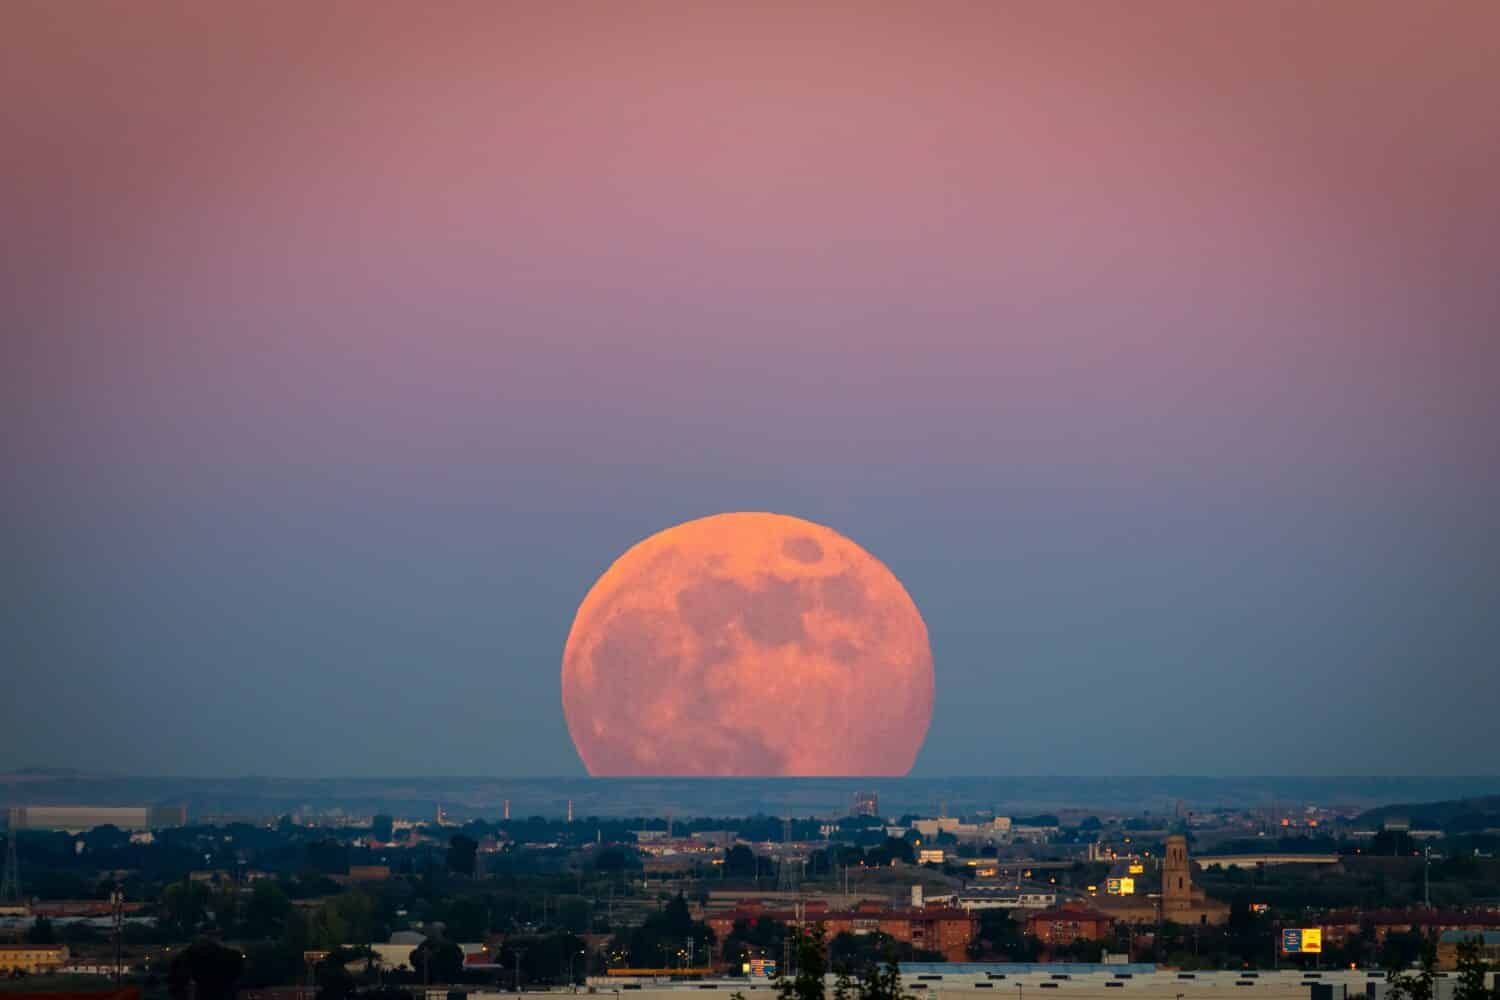 The strawberry Supermoon (Supermoon of strawberry) at sunset gradient from blue to pink on the city skyline in June 2020 in Spain.